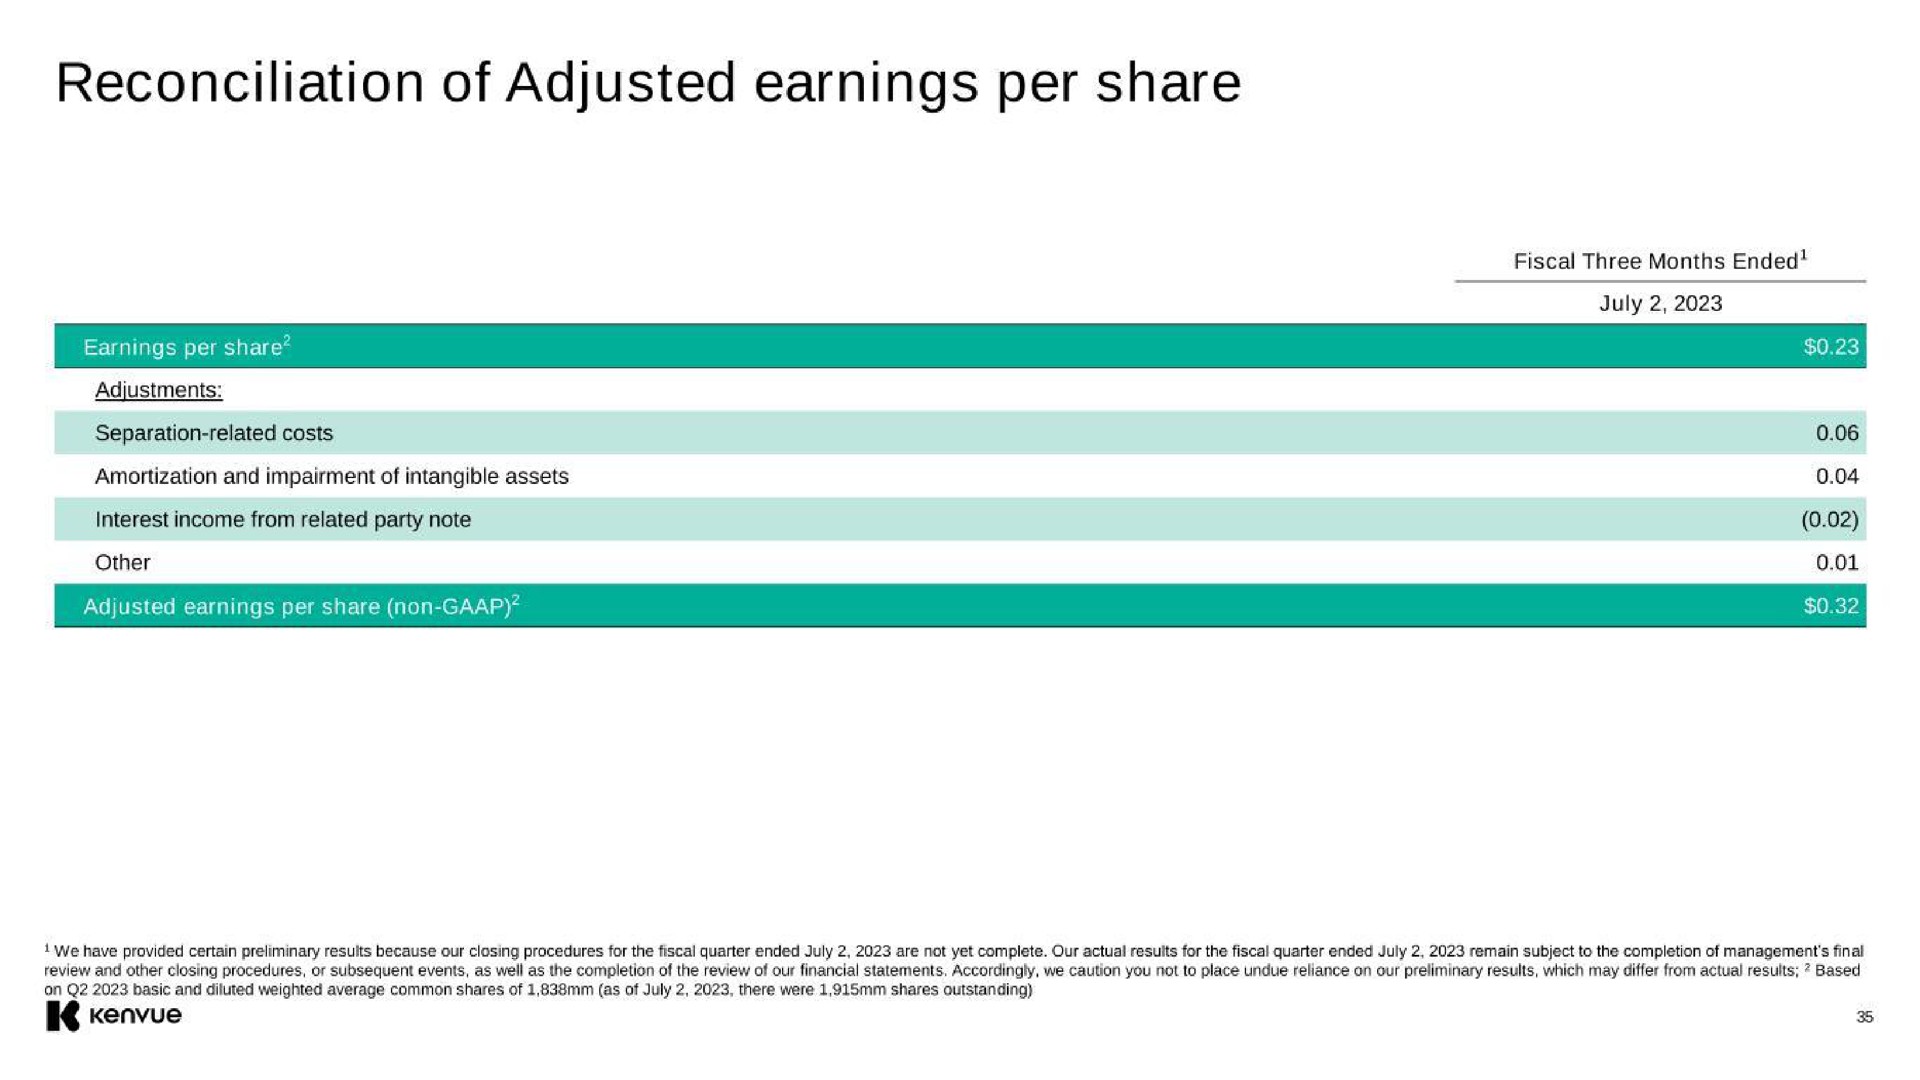 reconciliation of adjusted earnings per share | Kenvue